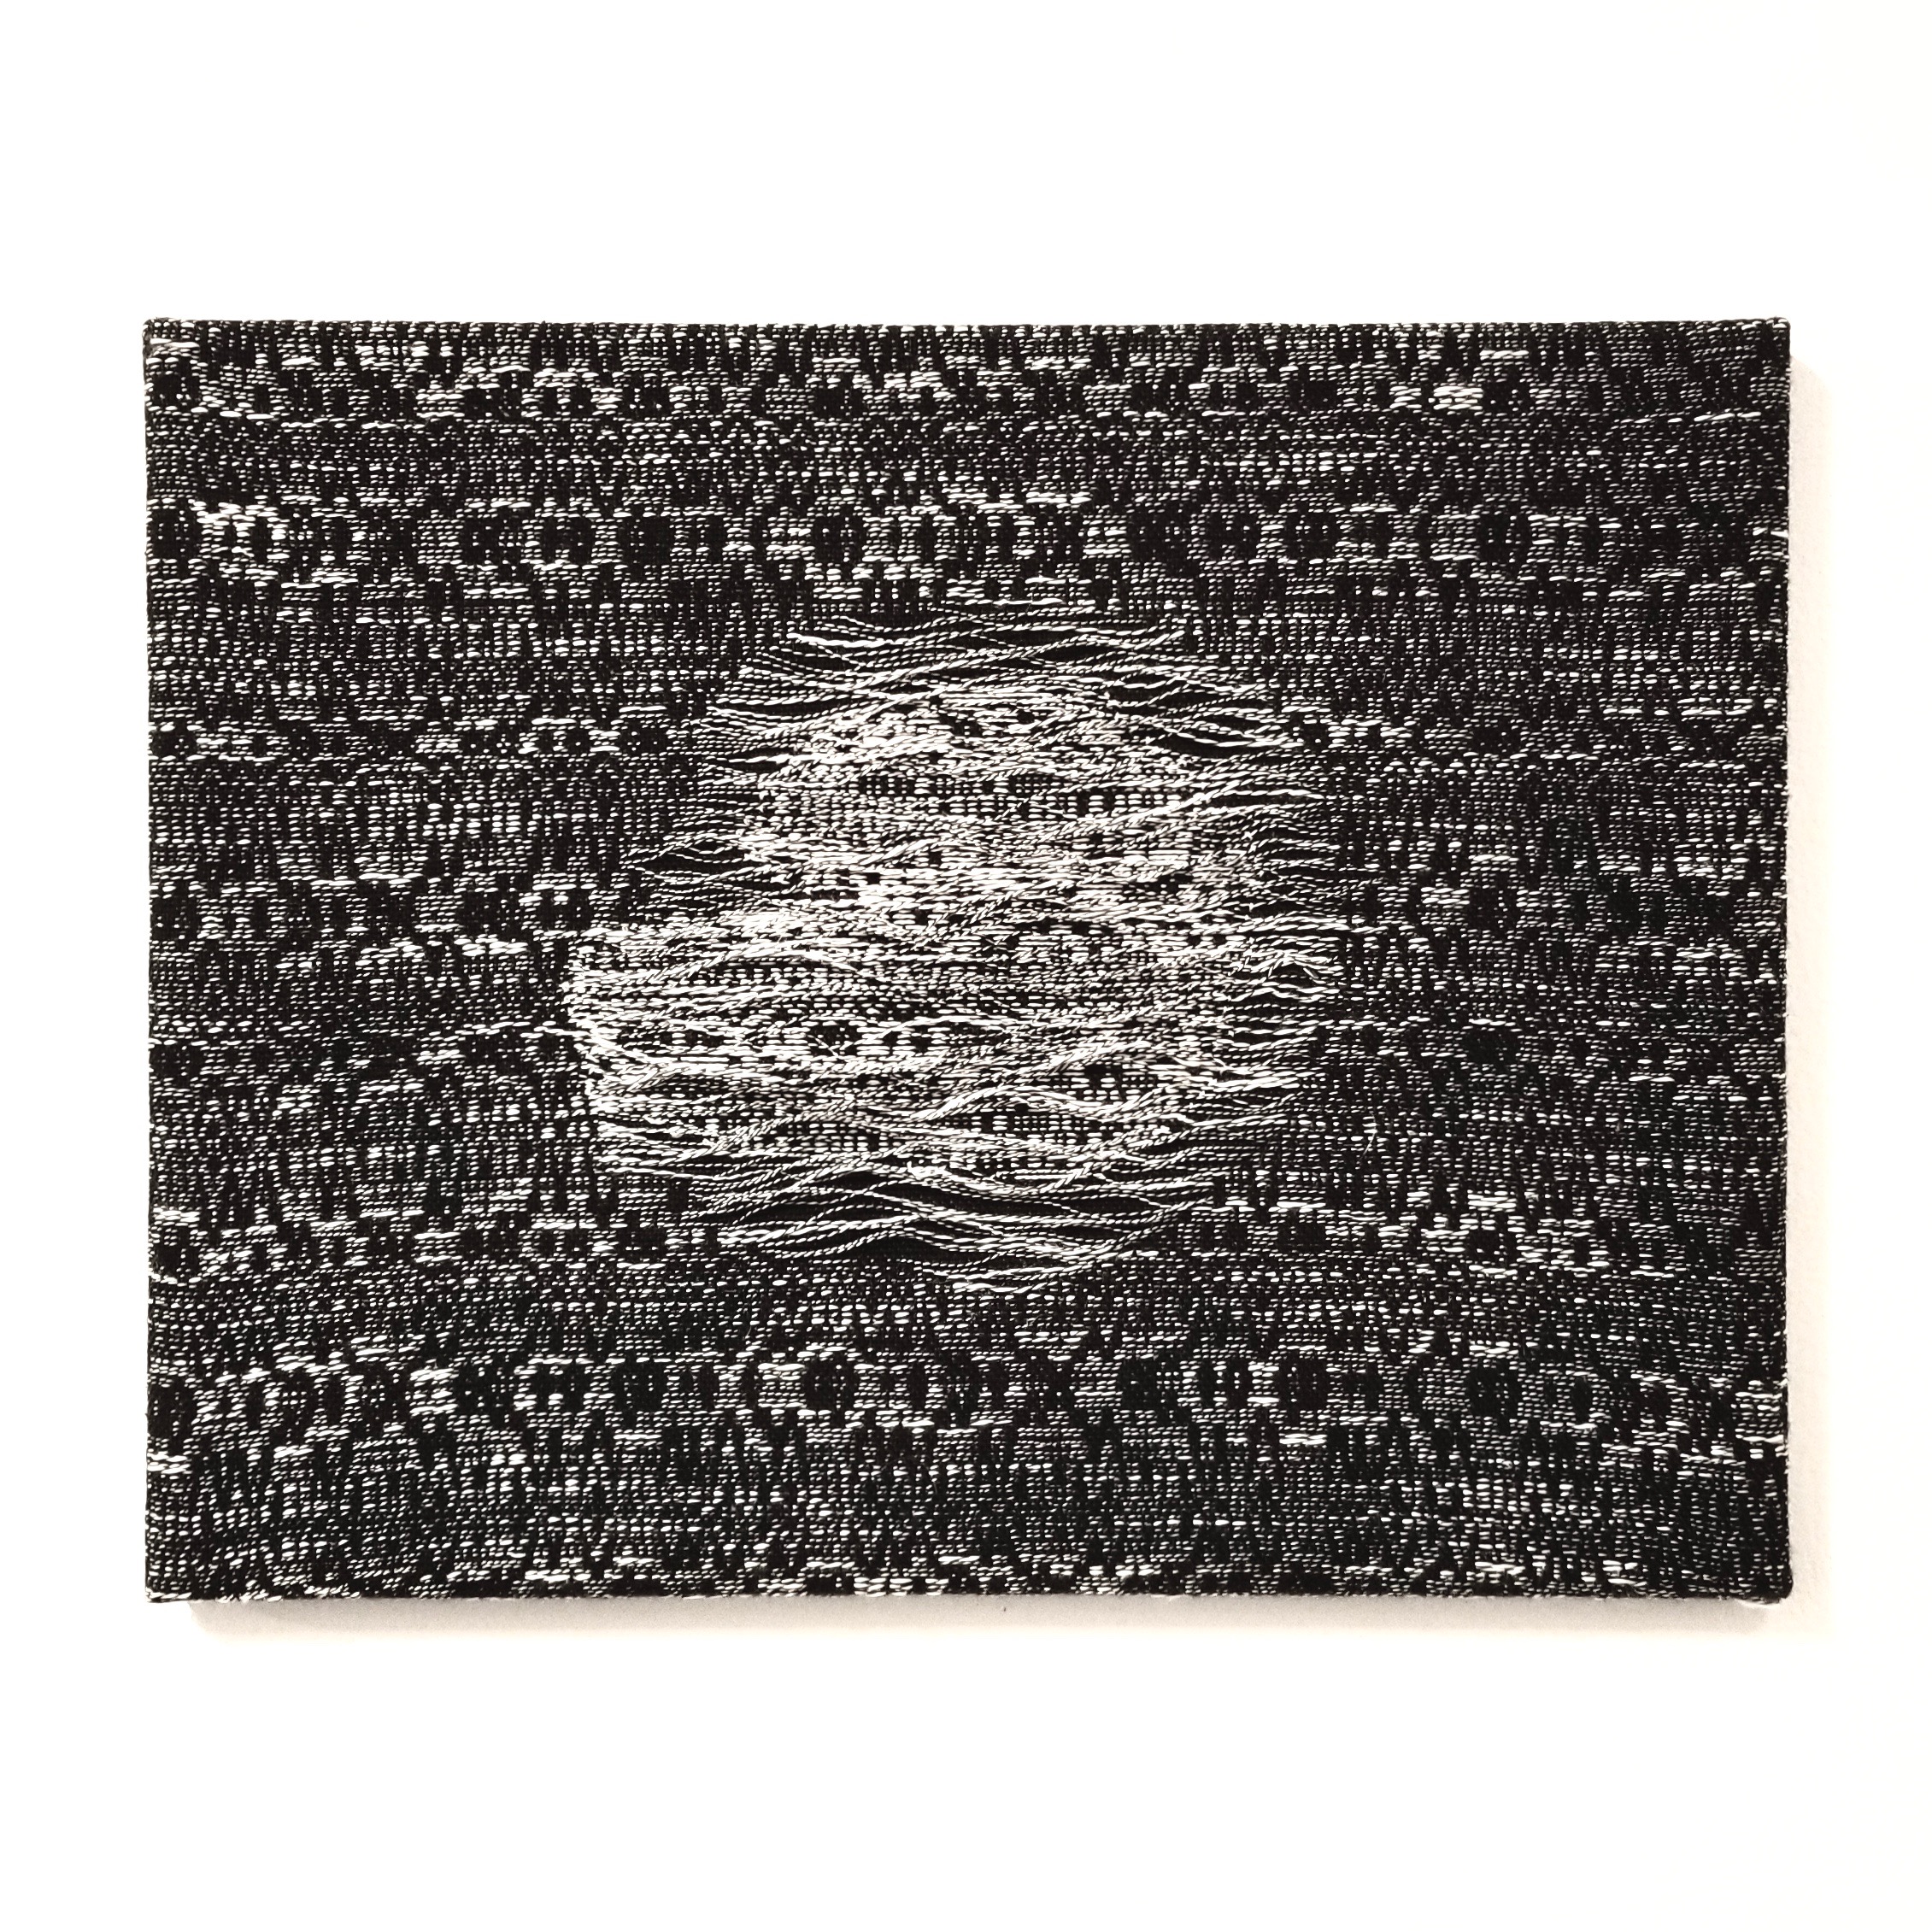   Melt   2019  18” x 14” x 1”  Handwoven wool, cottolin, and cotton 